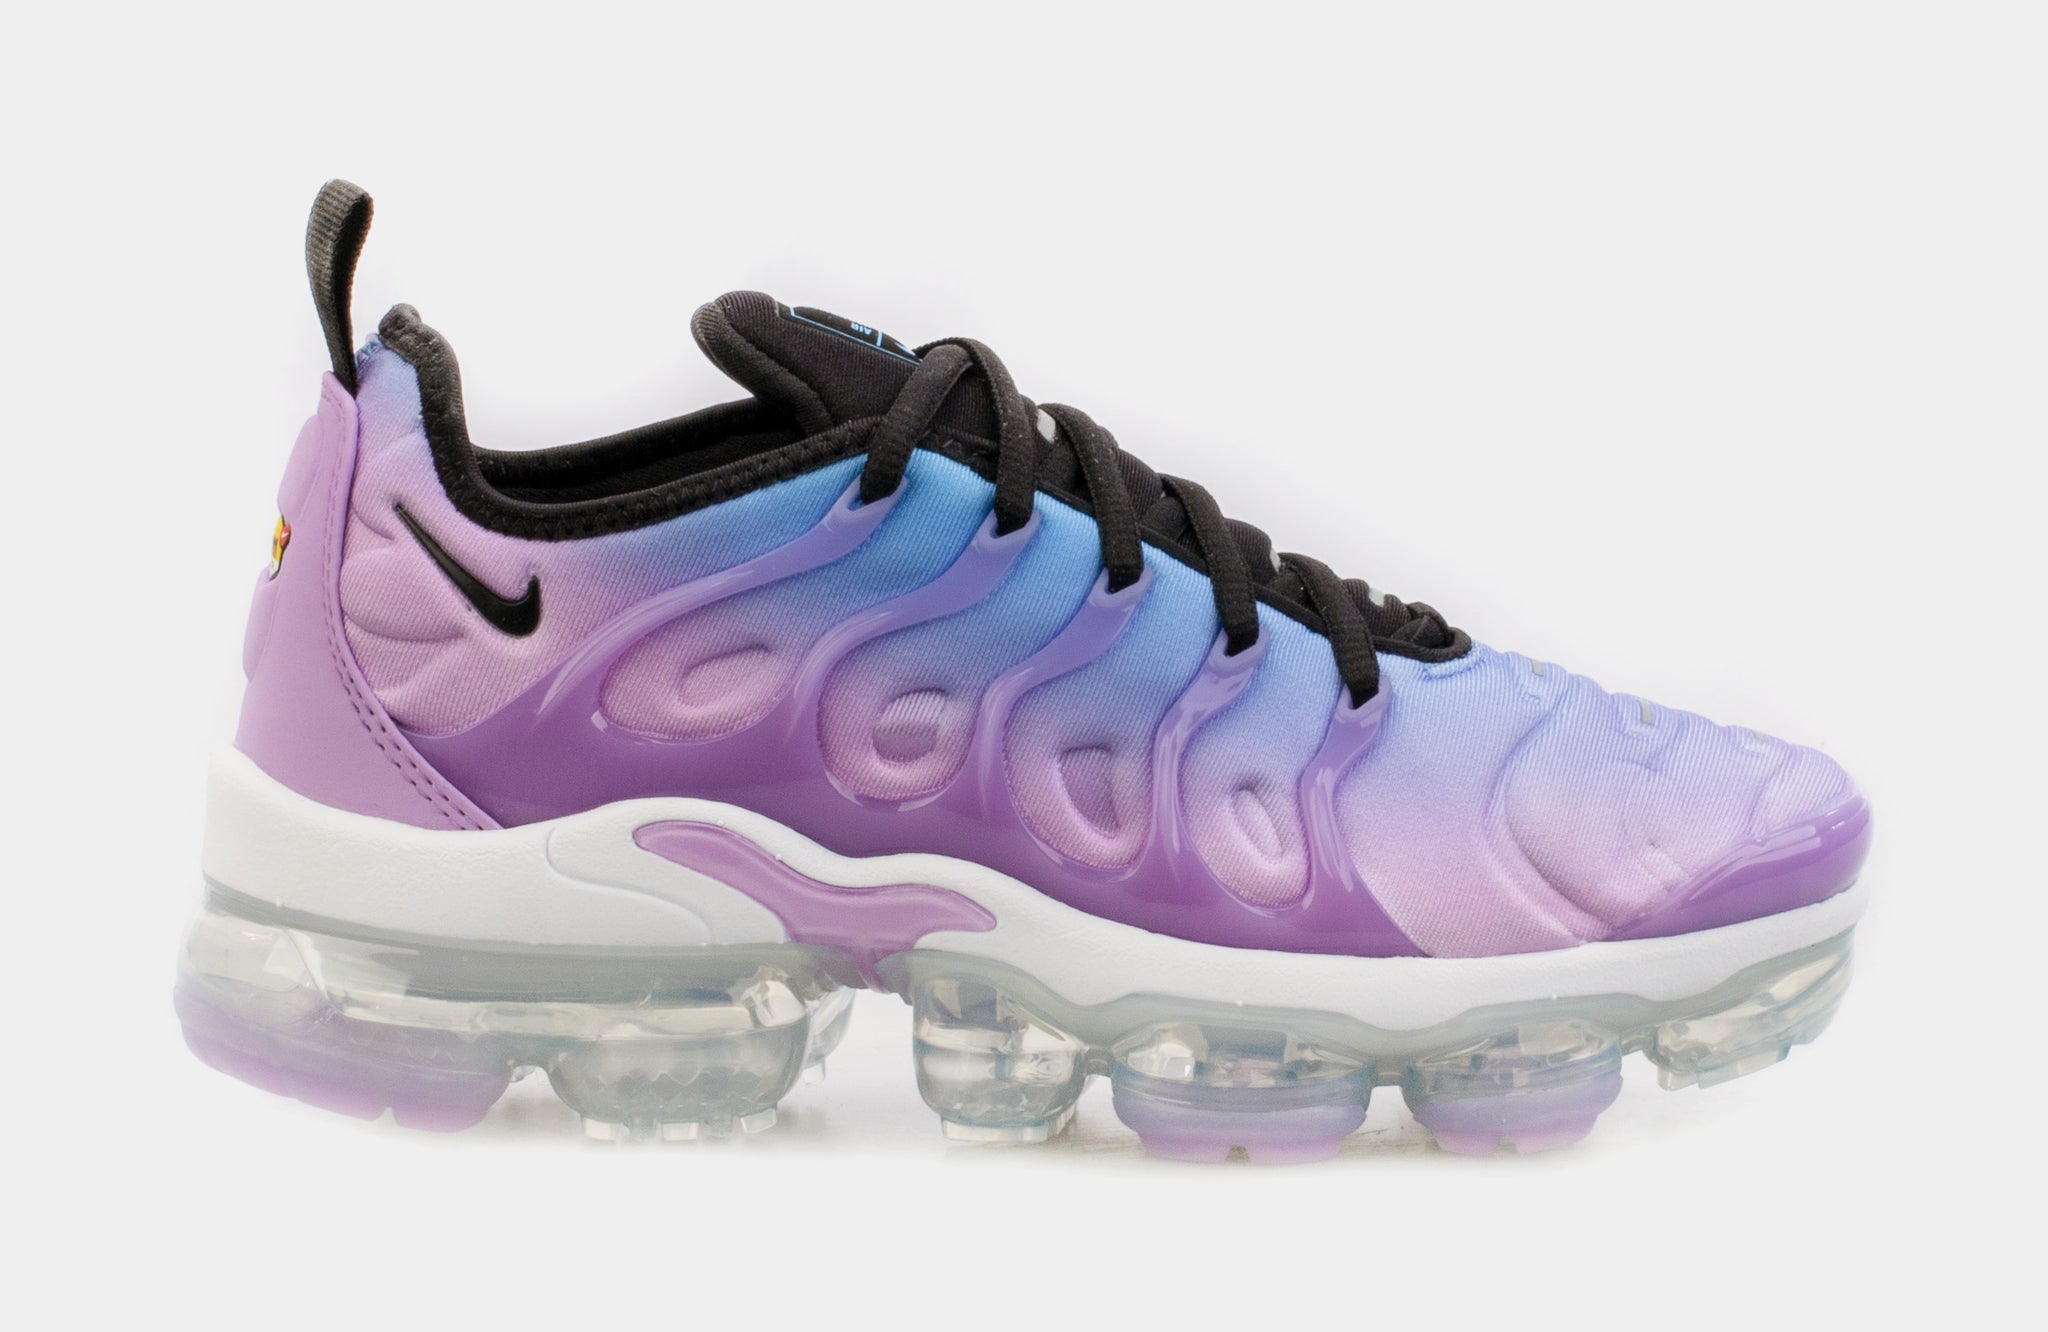 vapormax purple and white